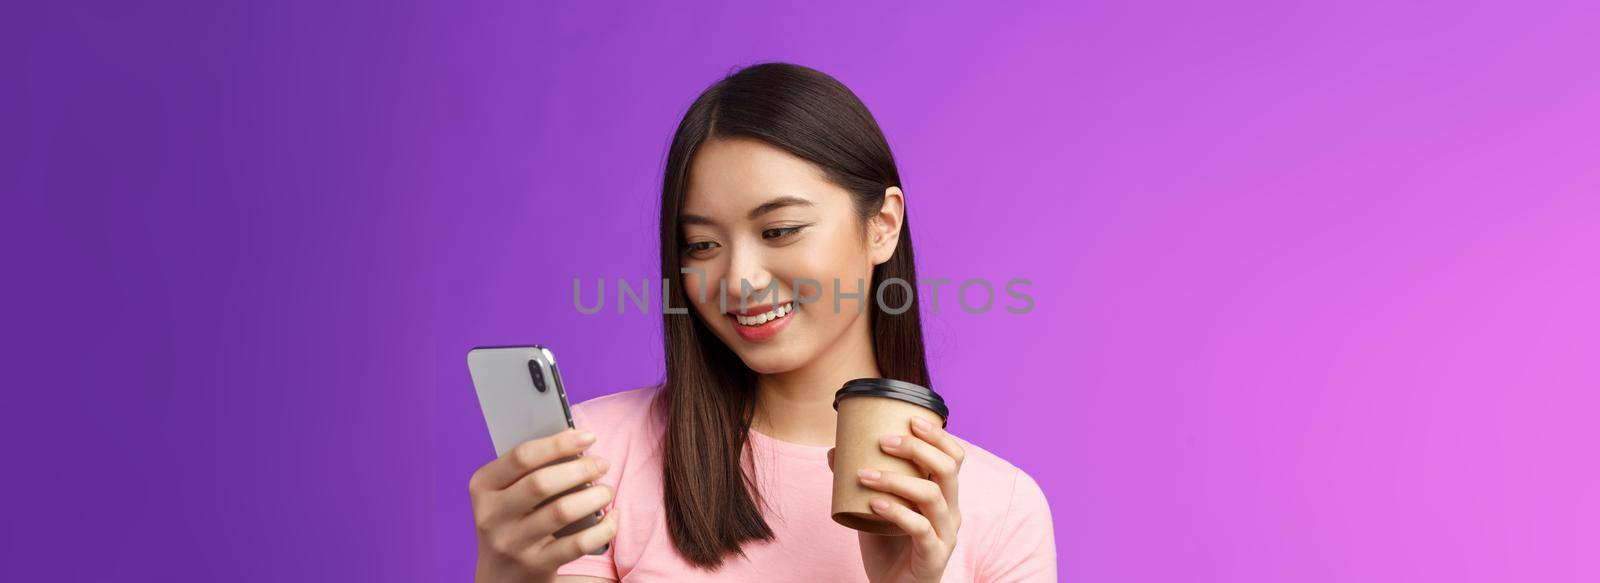 Close-up tender friendly asian female blogger checking social media drinking take-away coffee, smiling joyfully look telephone screen, reading interesting article, texting, purple background.